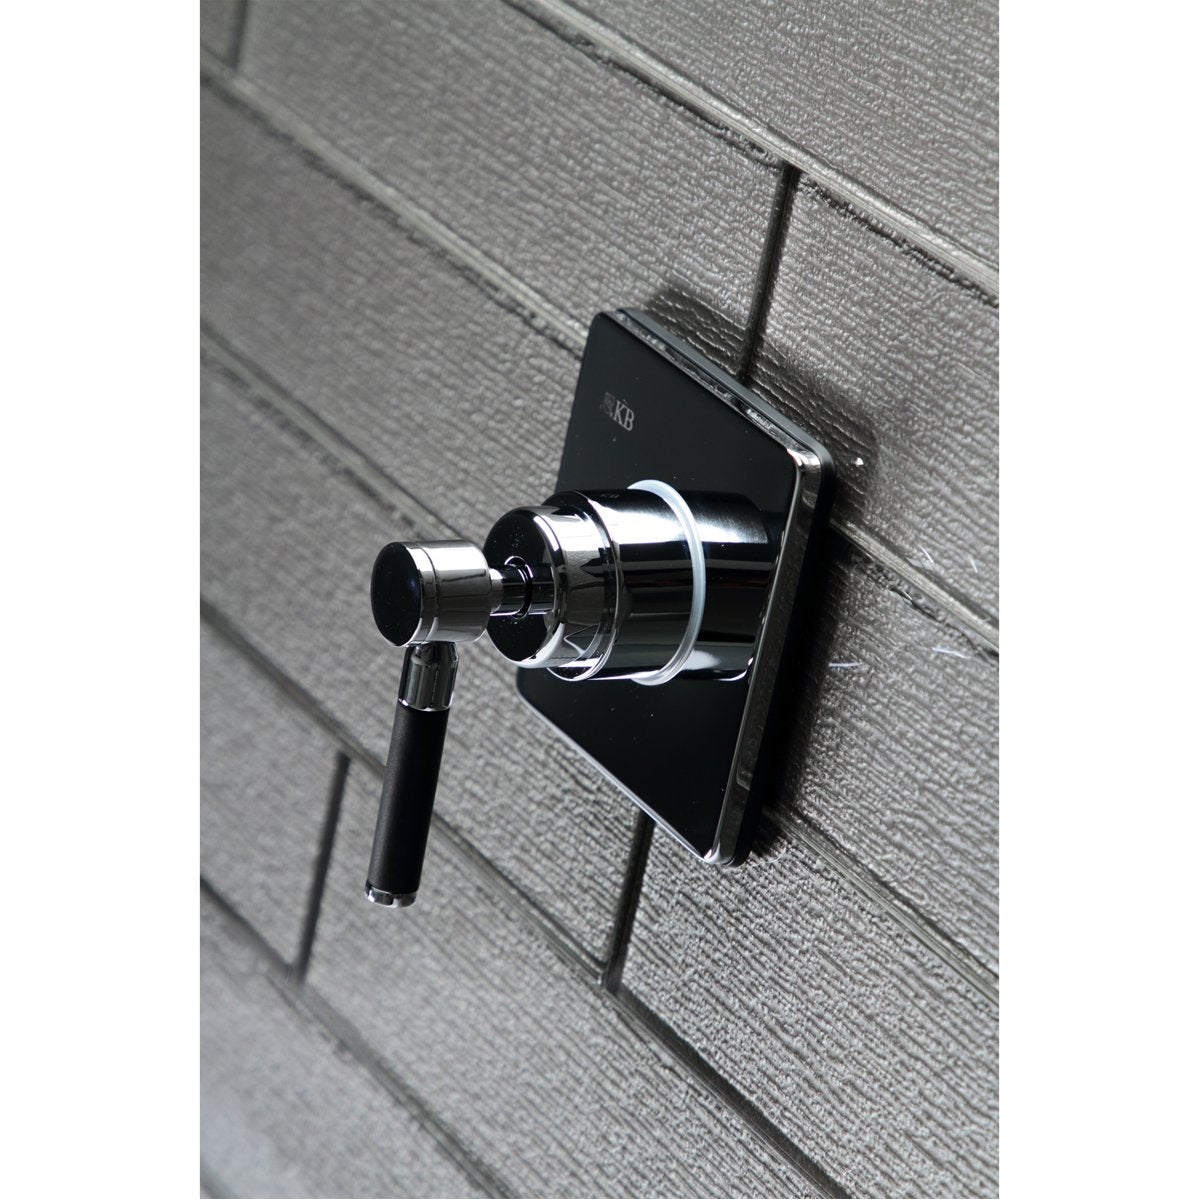 Kingston Brass Concord Three-Way Diverter Valve with Single-Handle and Square Plate